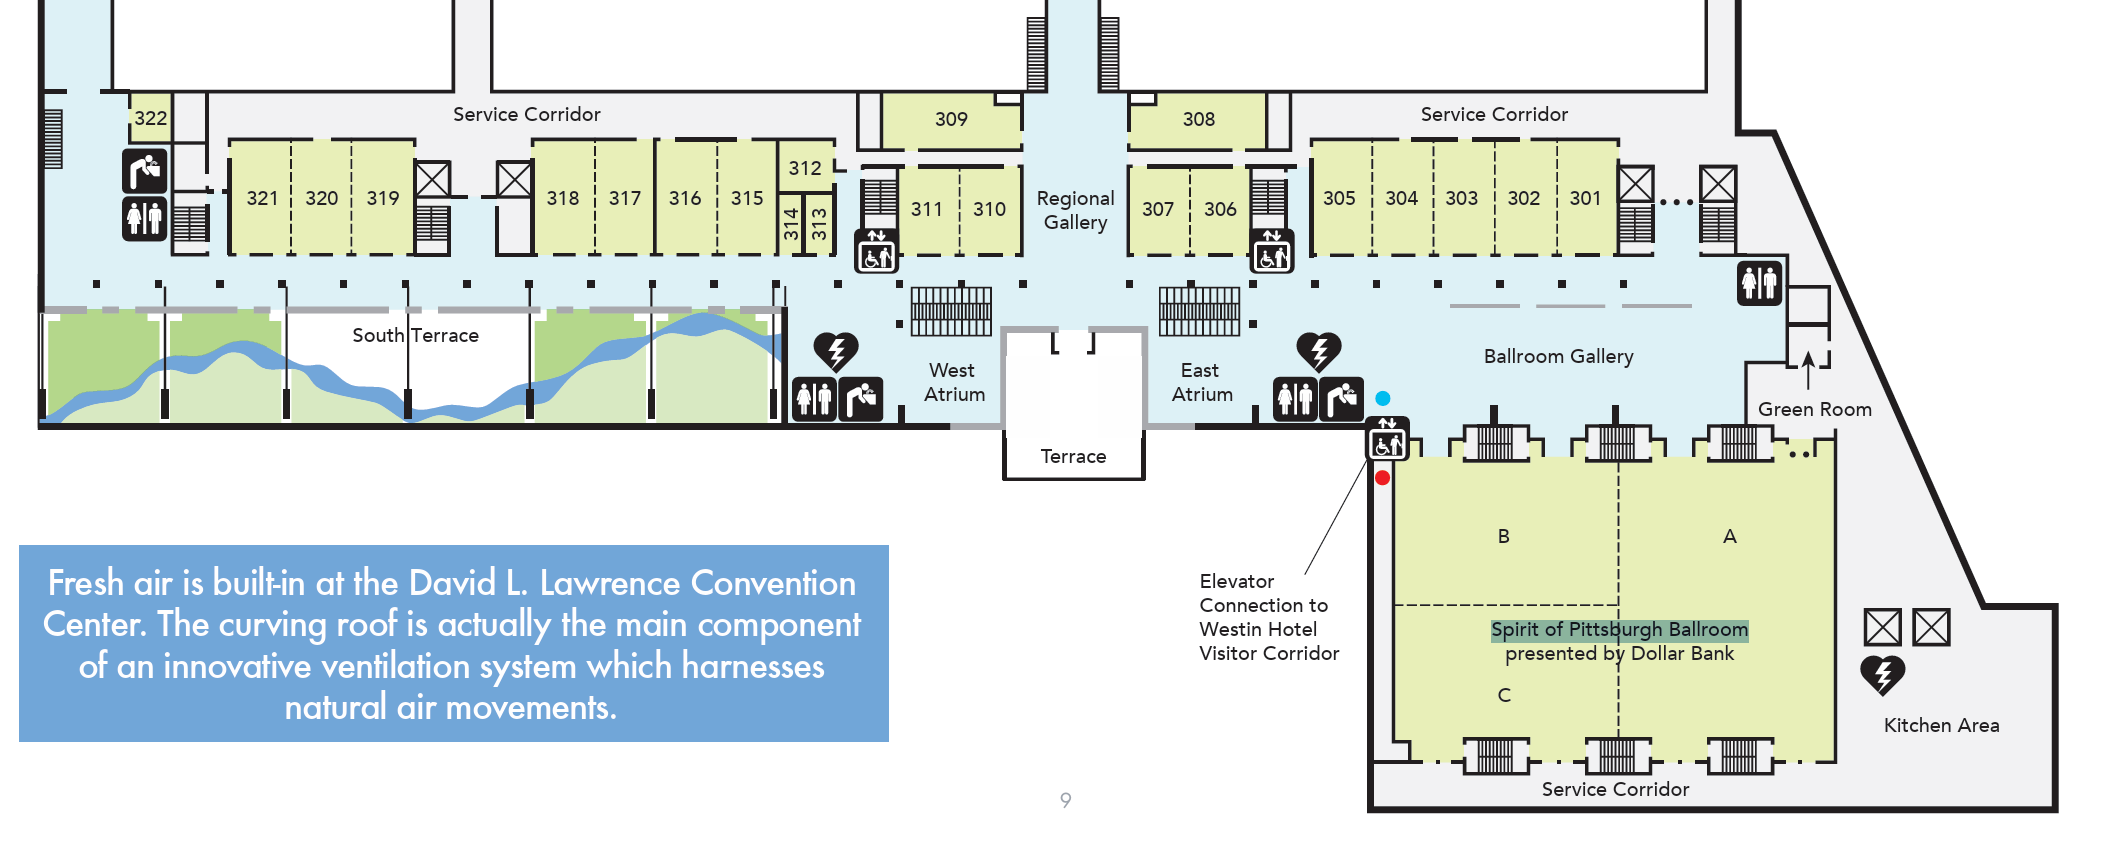 Floor Plan of the David L. Lawrence Convention Center